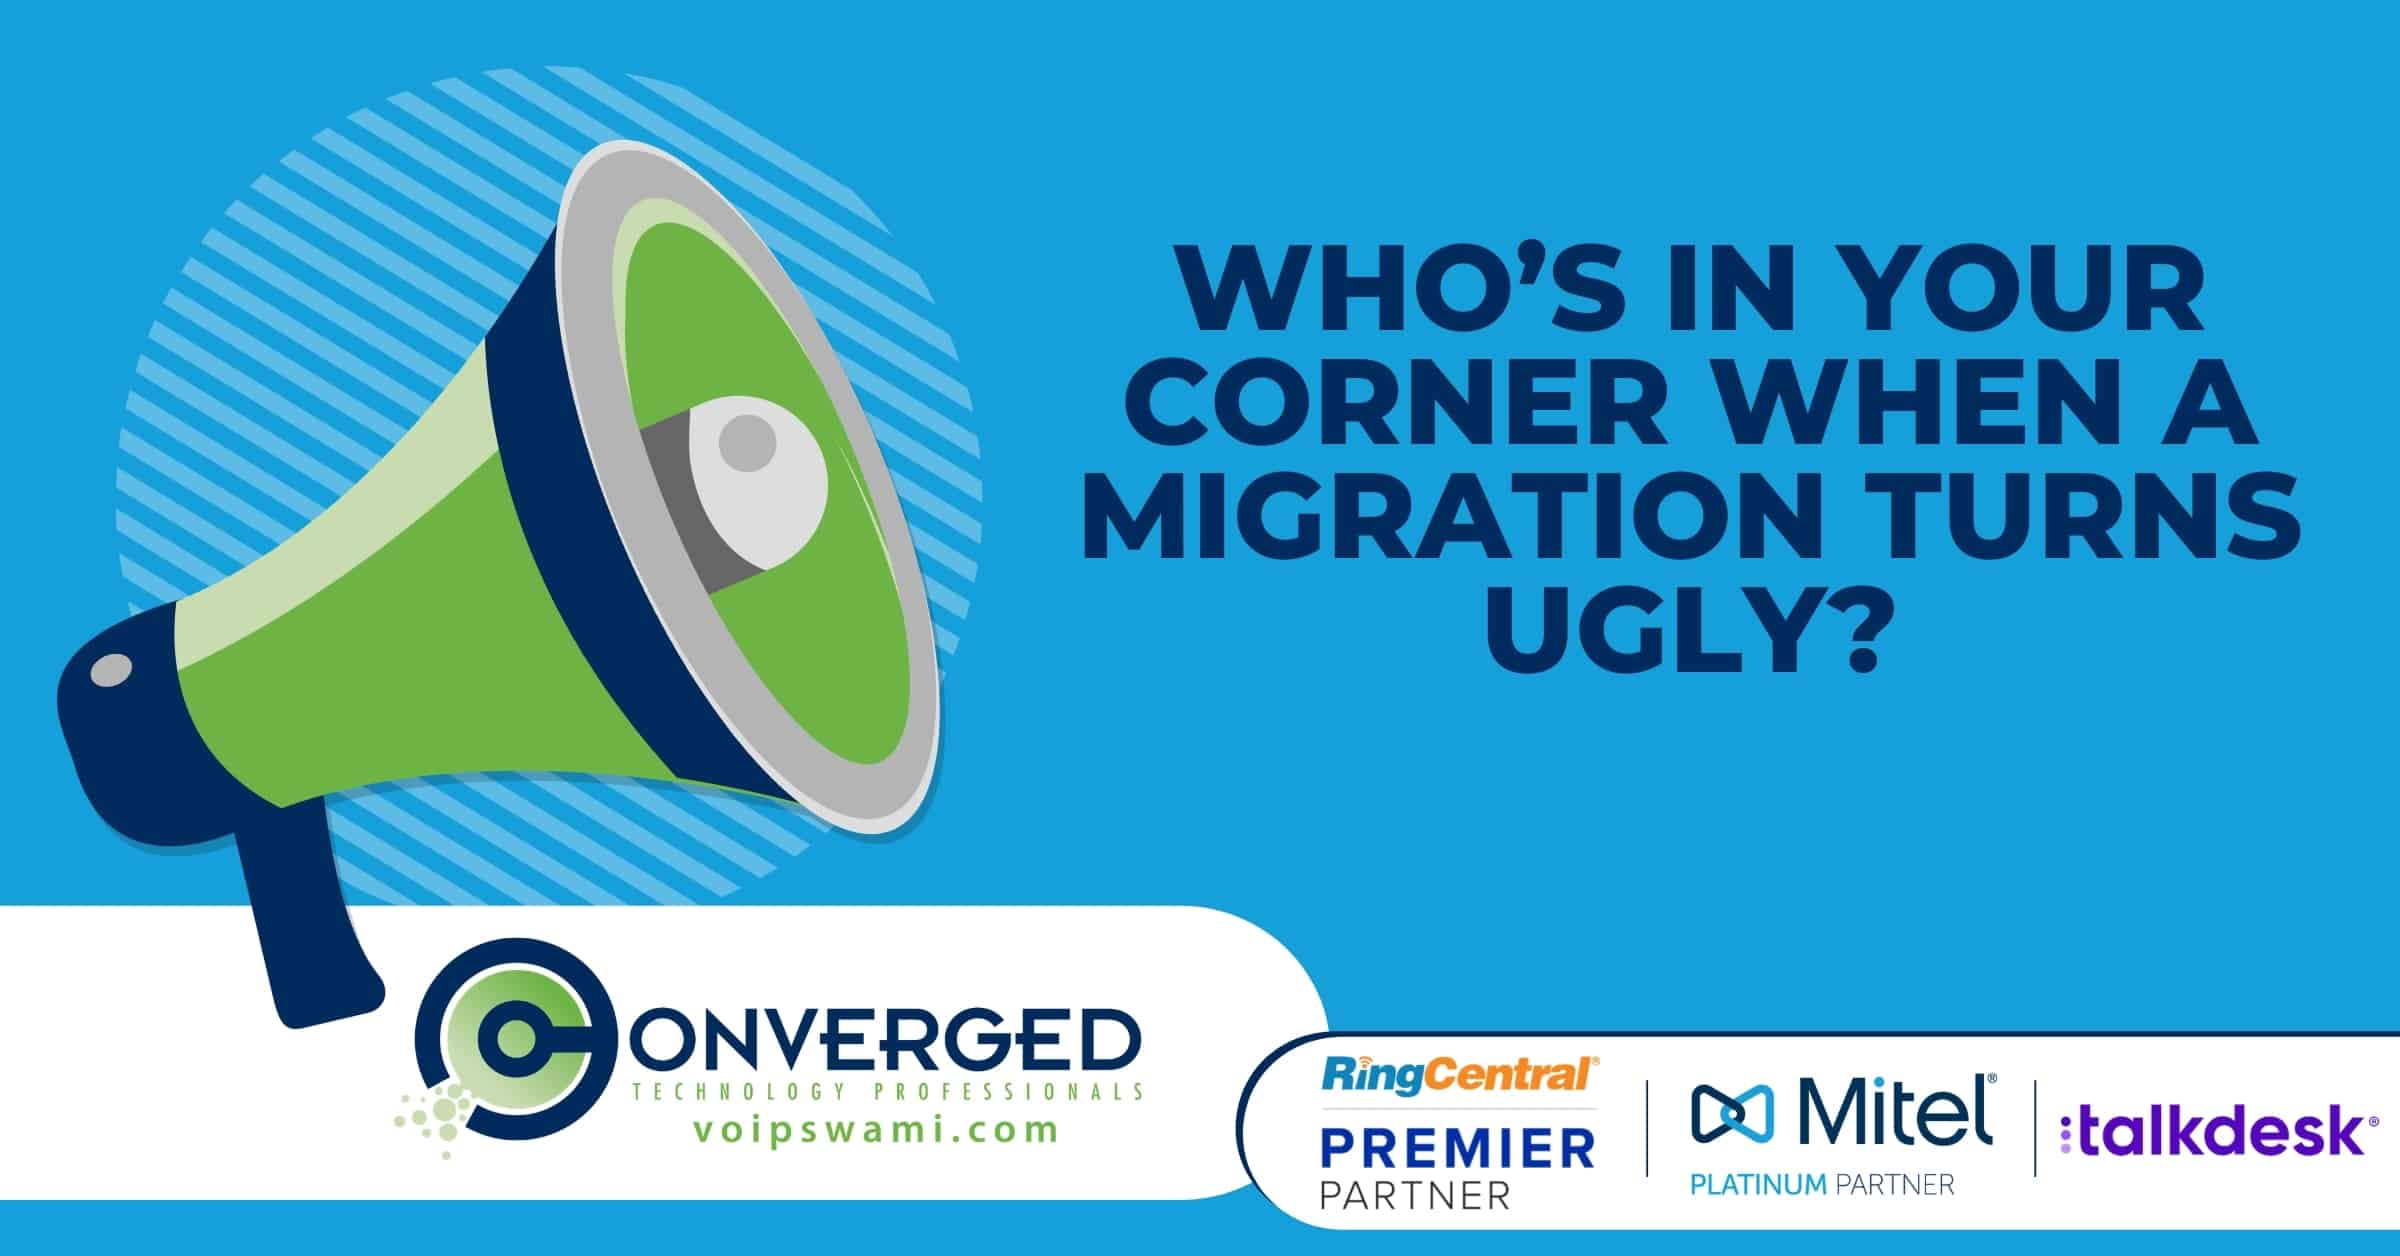 Who’s In Your Corner When a Migration Turns Ugly